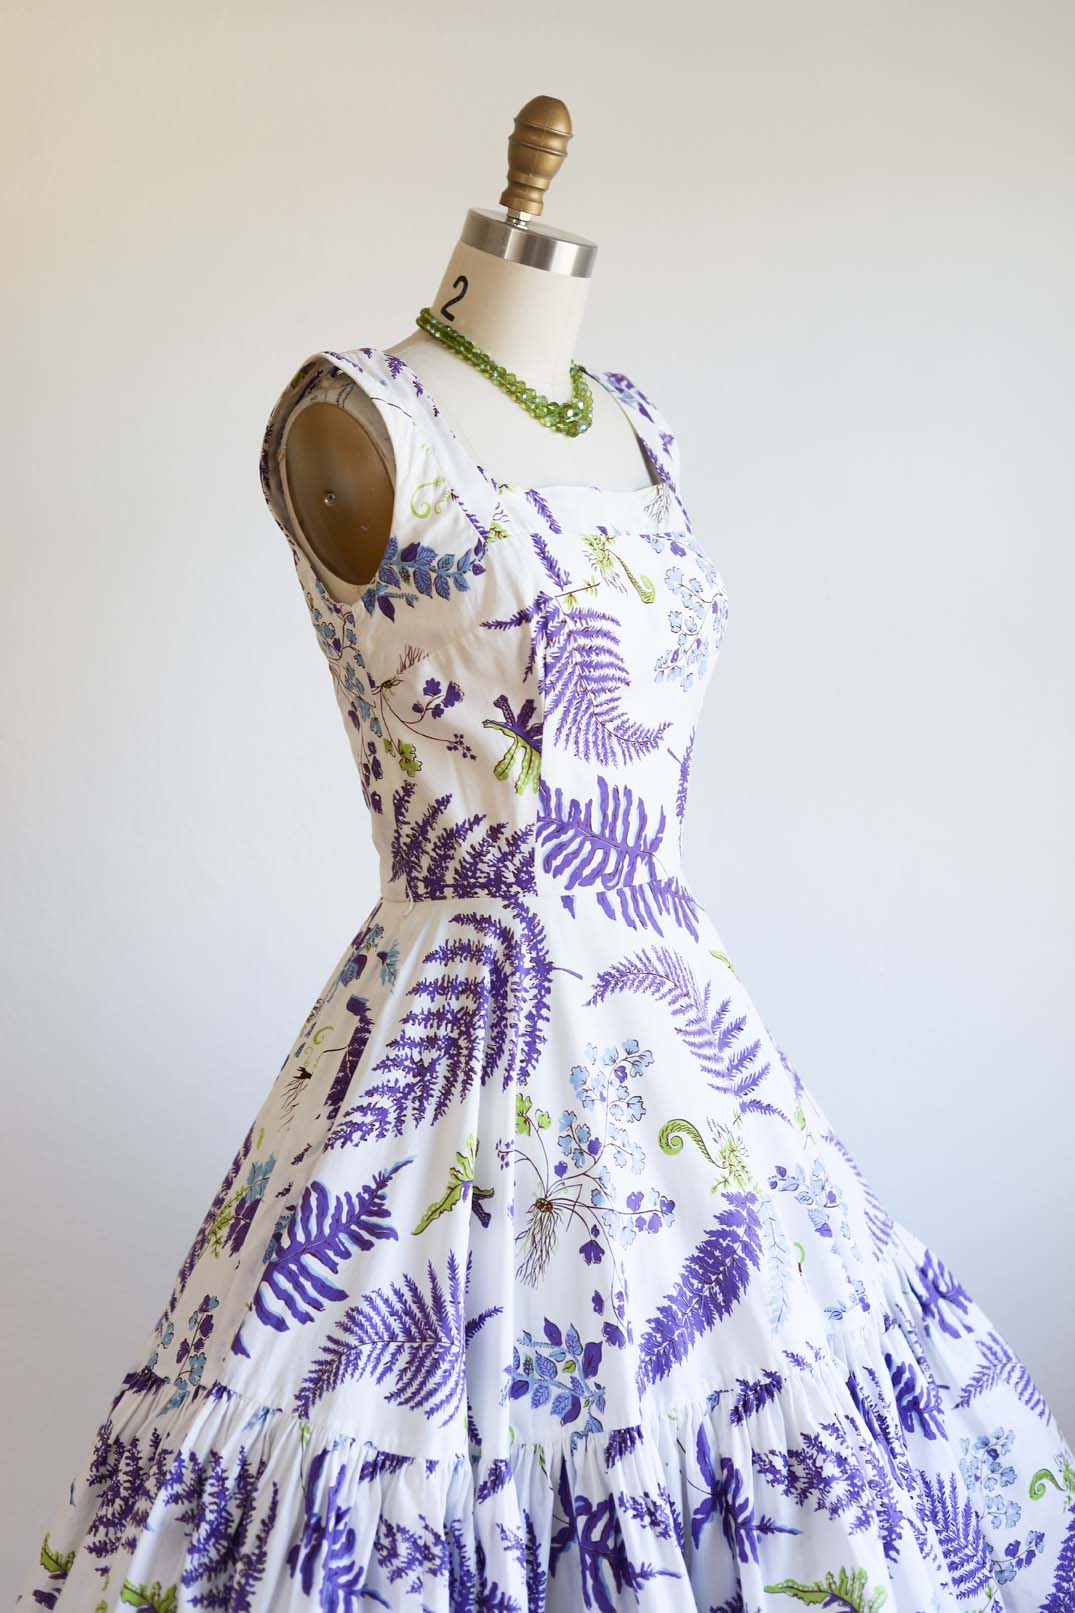 Vintage 1950s Dress - WOW!! White Cotton Carolyn Schnurer Sundress w Violet, Pastel Blue + Lime Ferns + Weed Flowers & Roots! Size XS to S